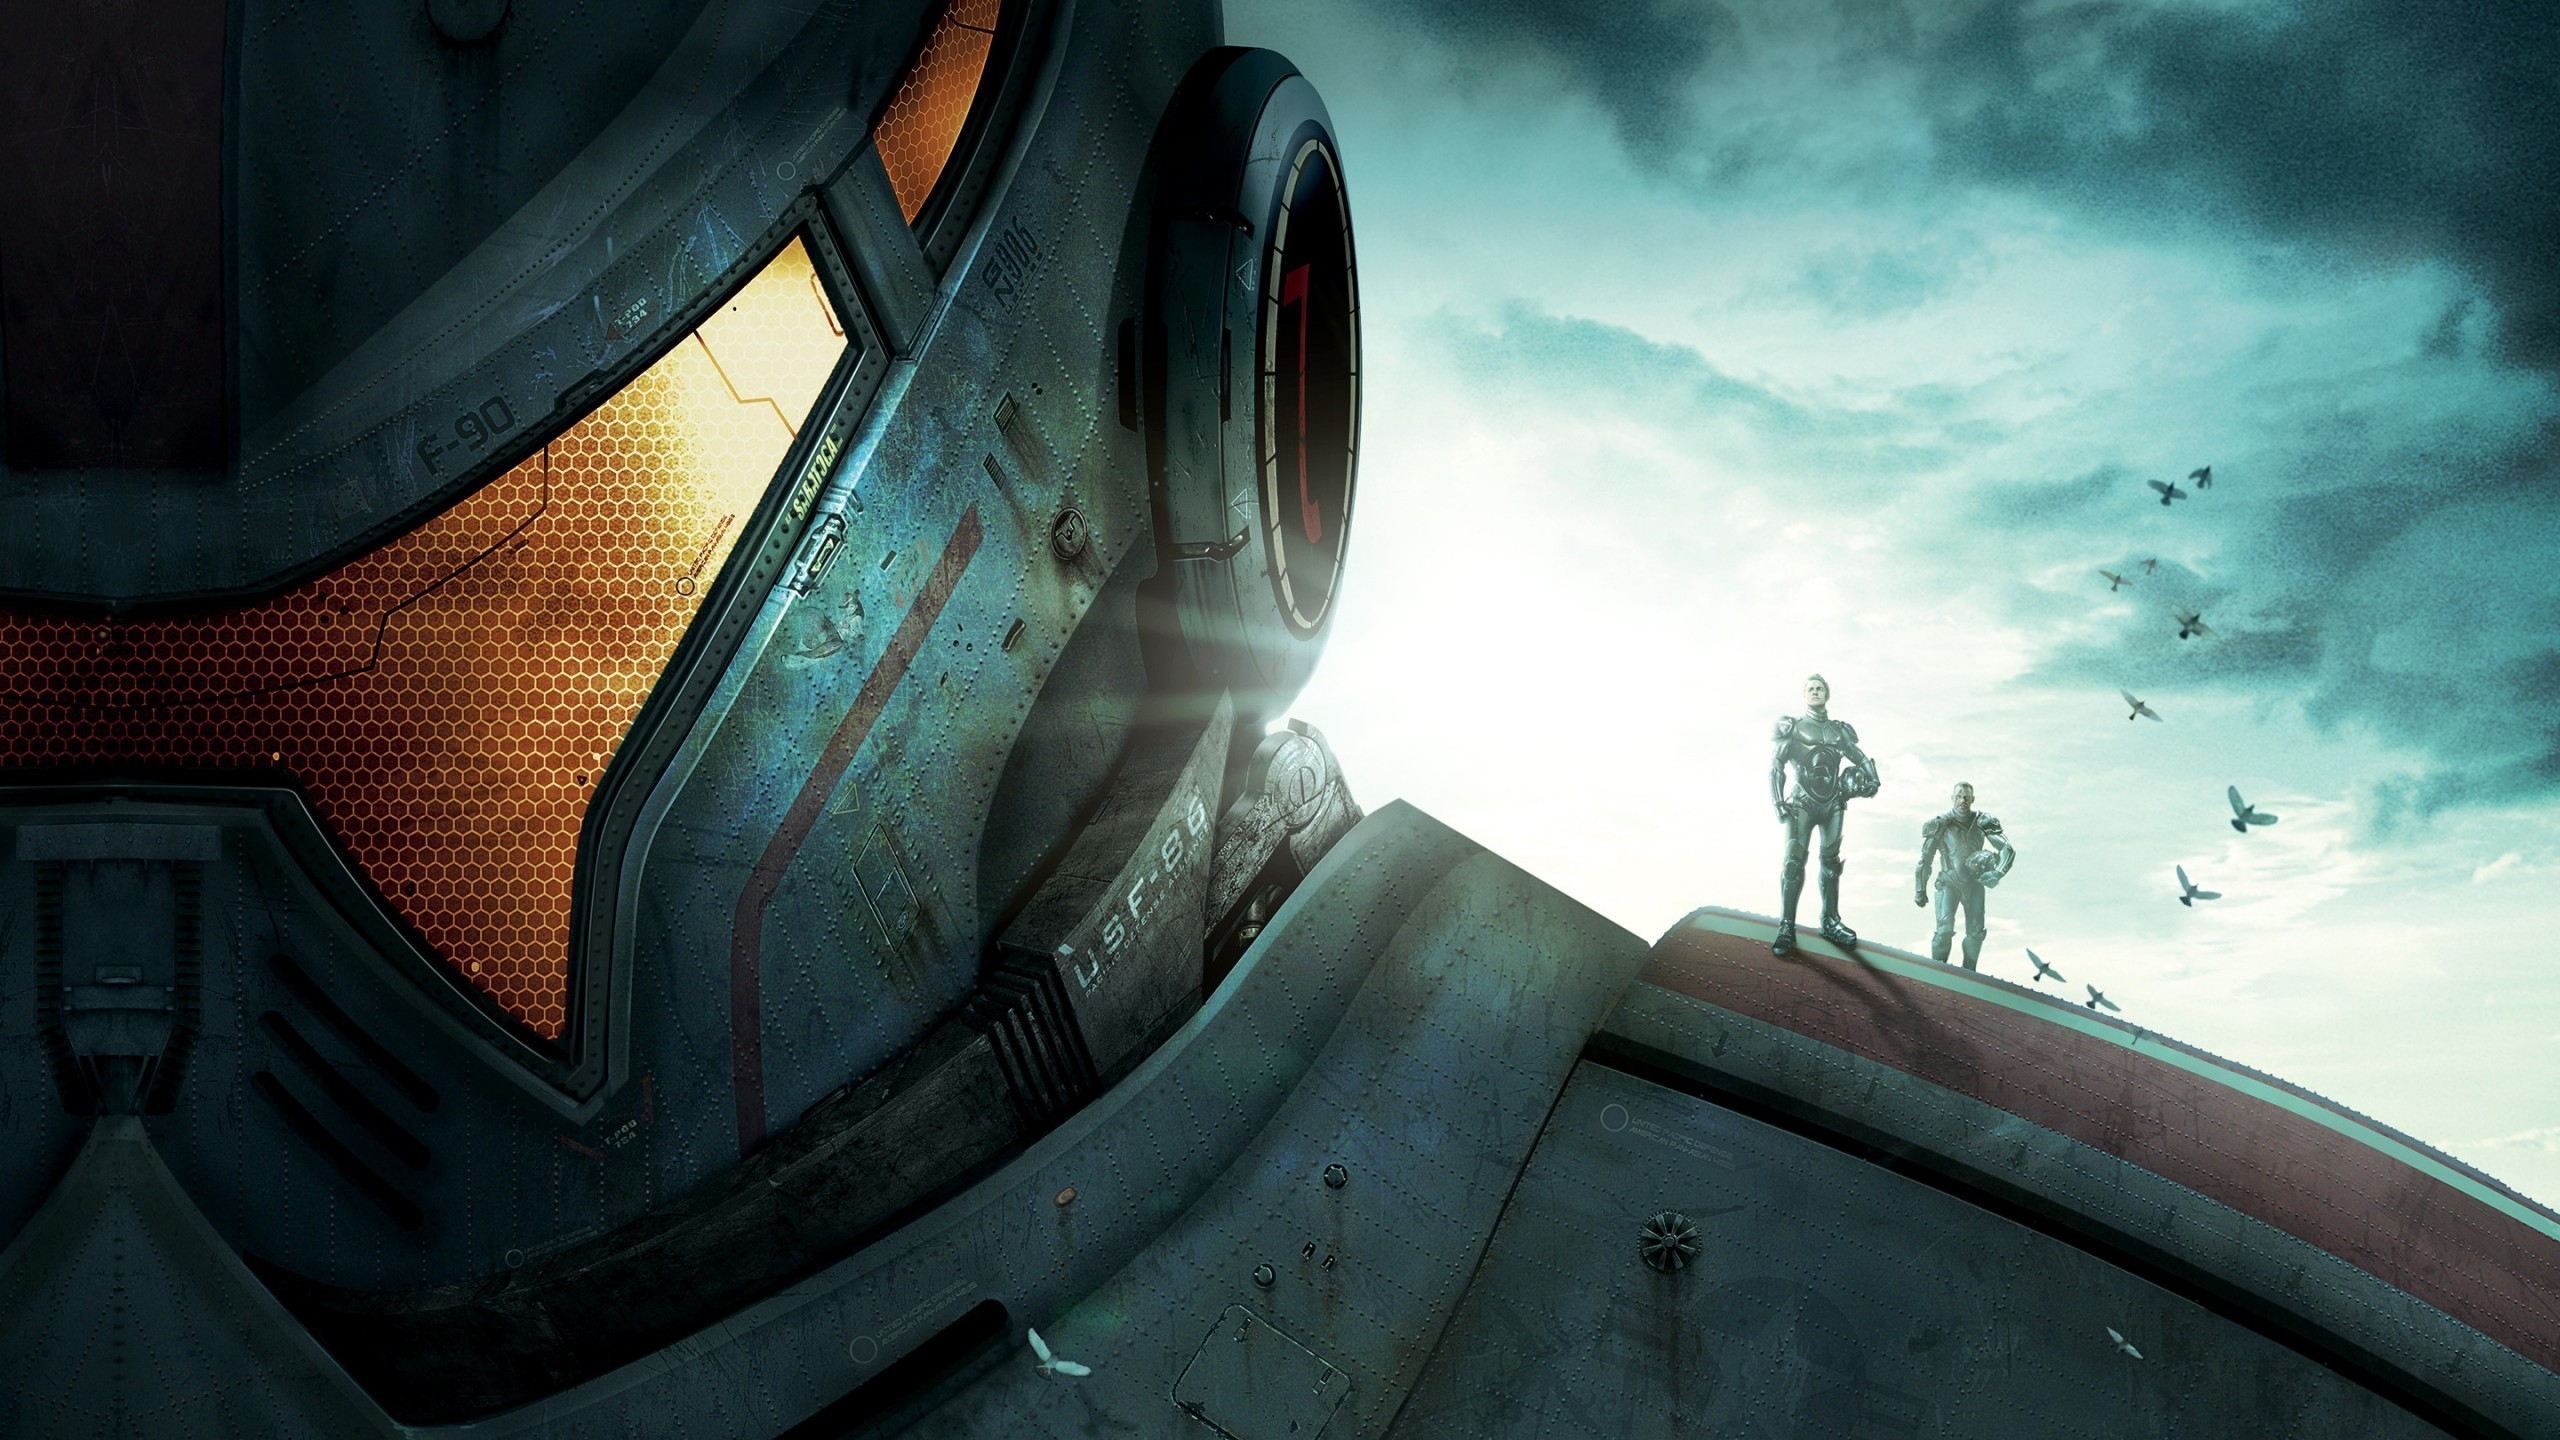 Pacific Rim Film Poster for 2560x1440 HDTV resolution